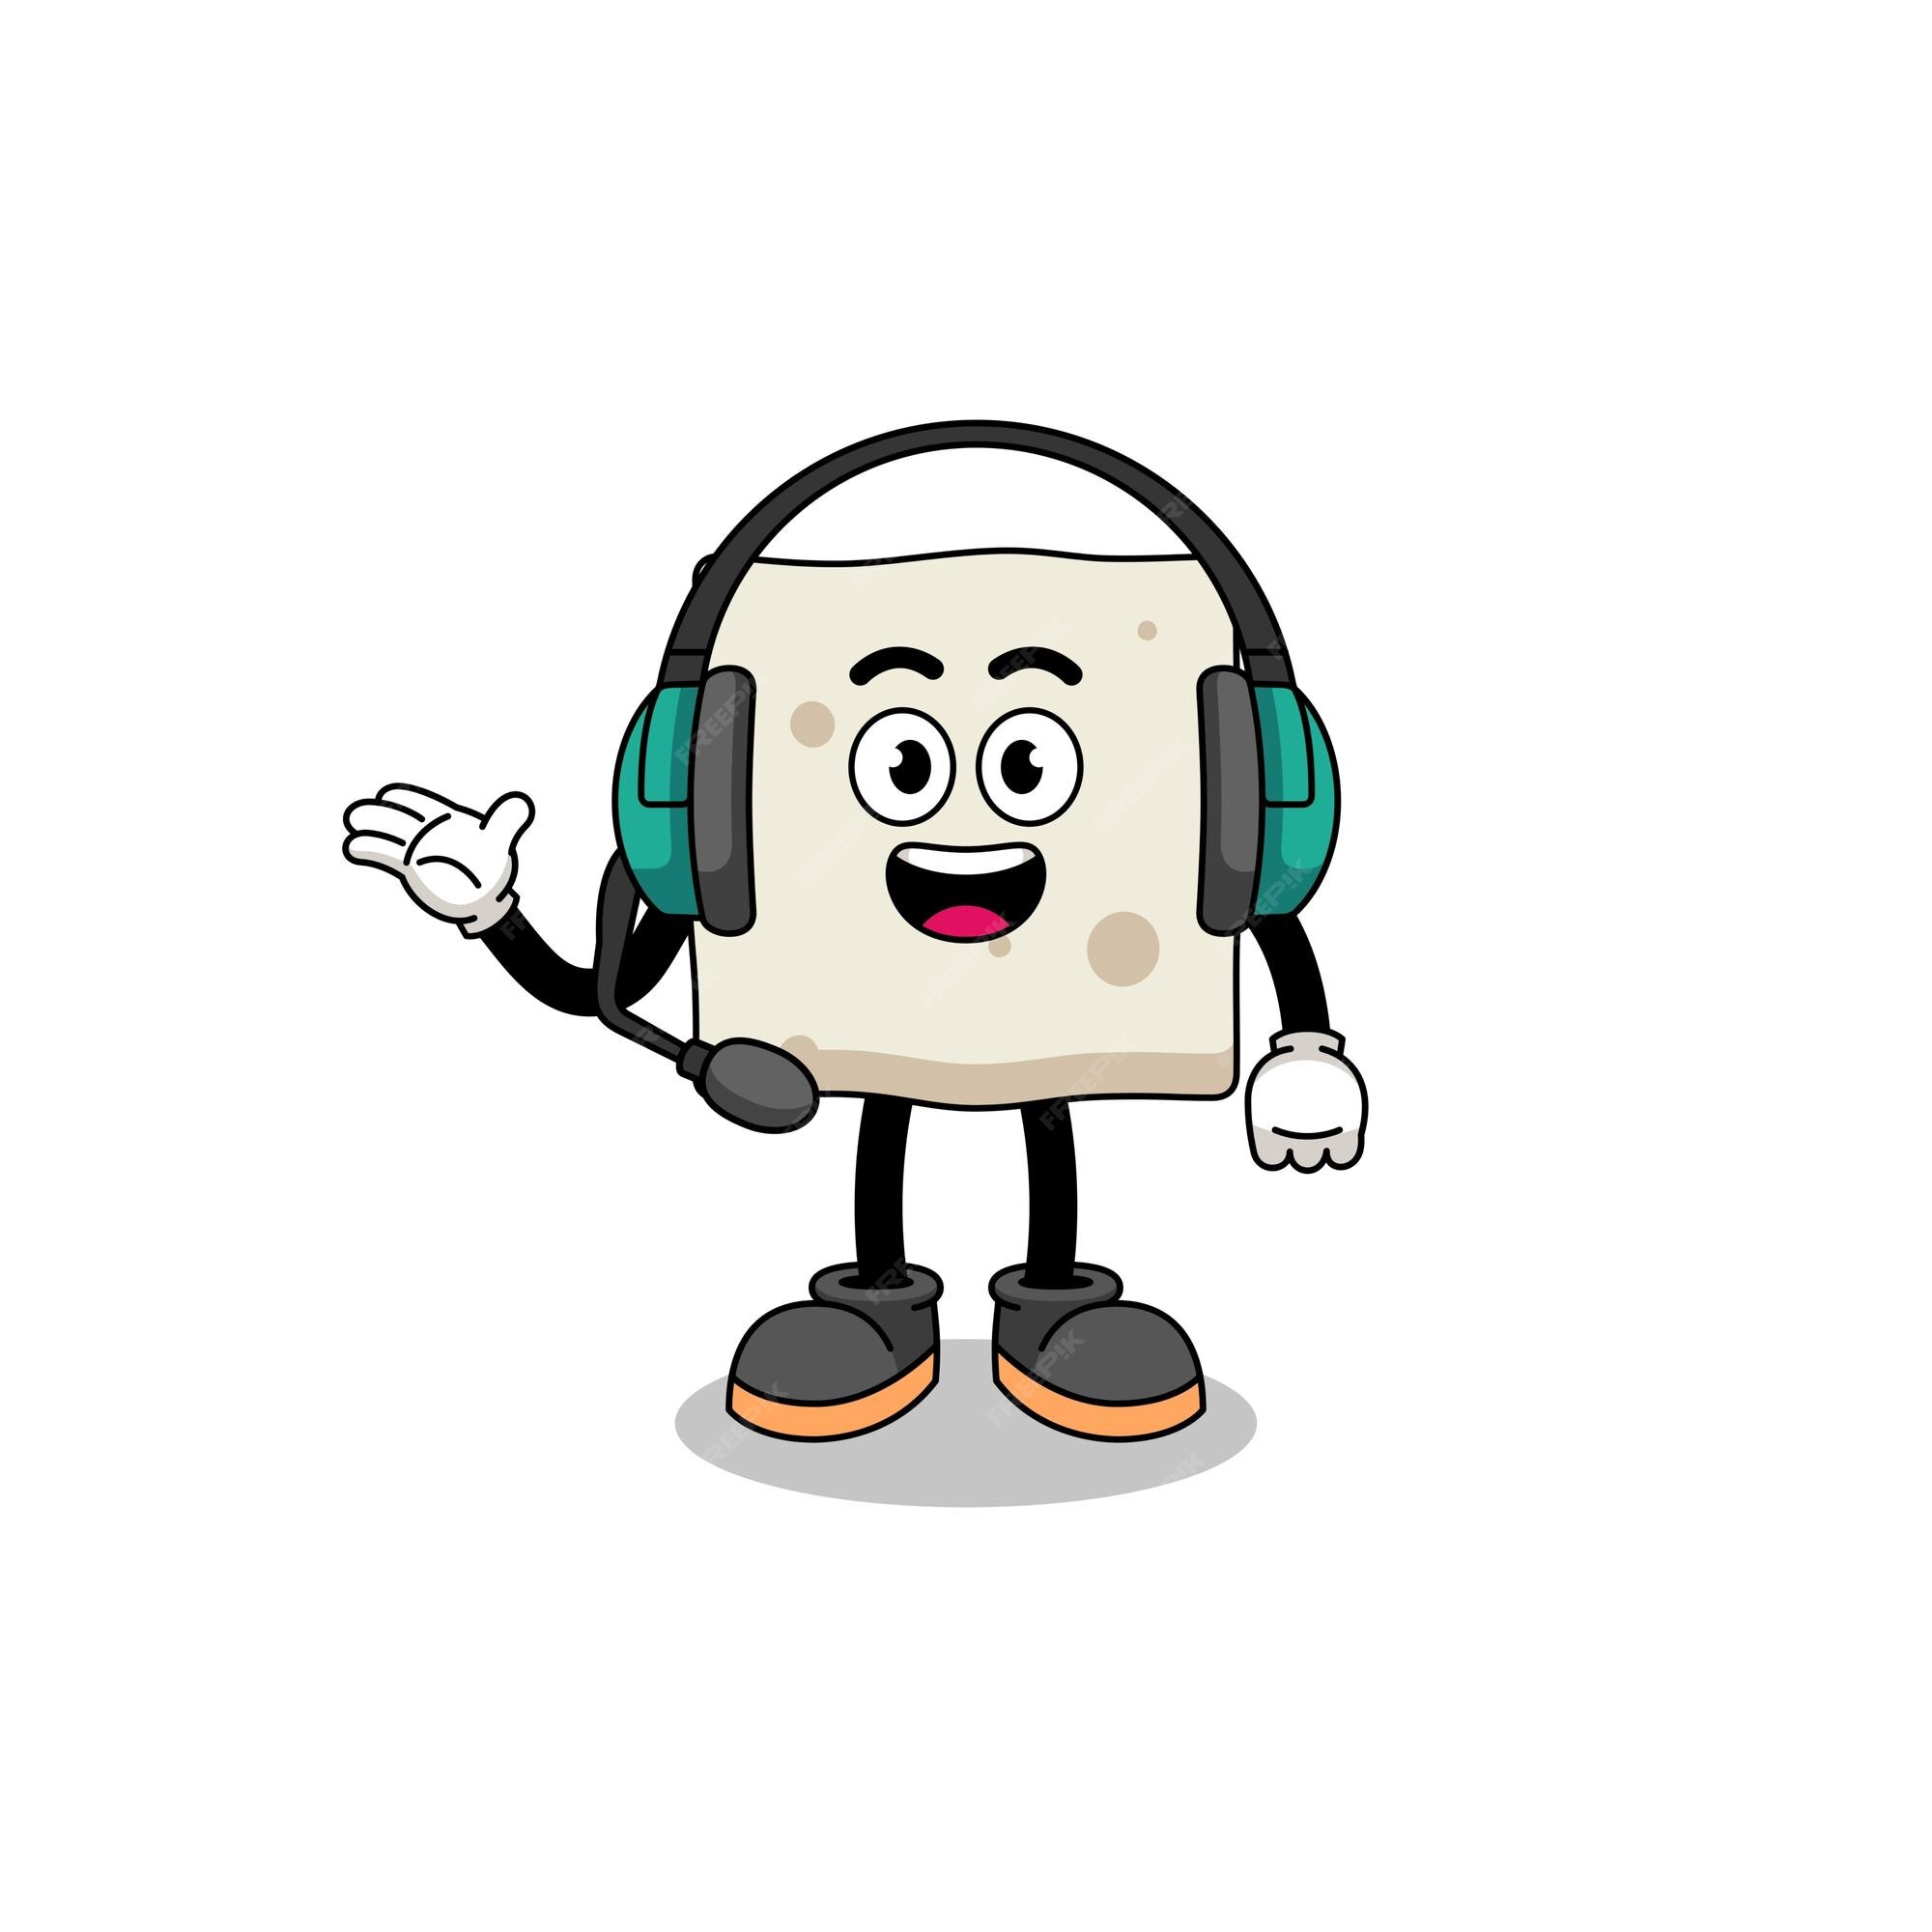 Page 2 | Cartoon Character With Headphones Images - Free Download on Freepik